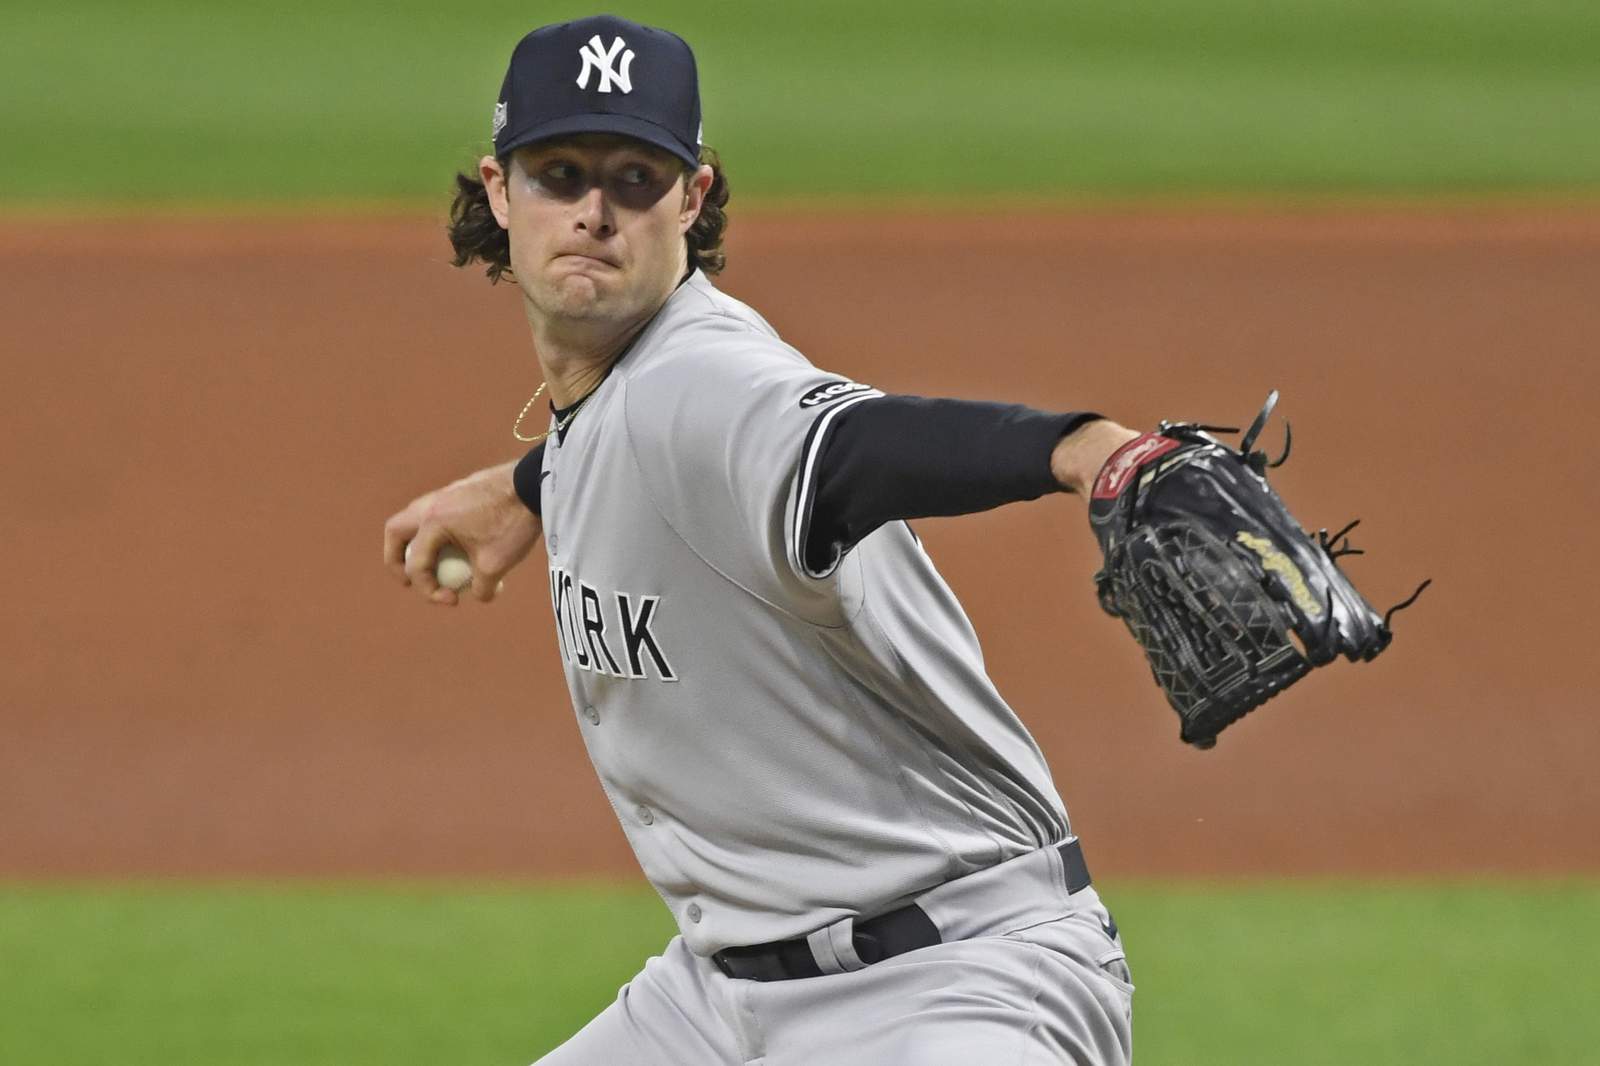 Yanks' Cole: Players concerned about lack of competitiveness